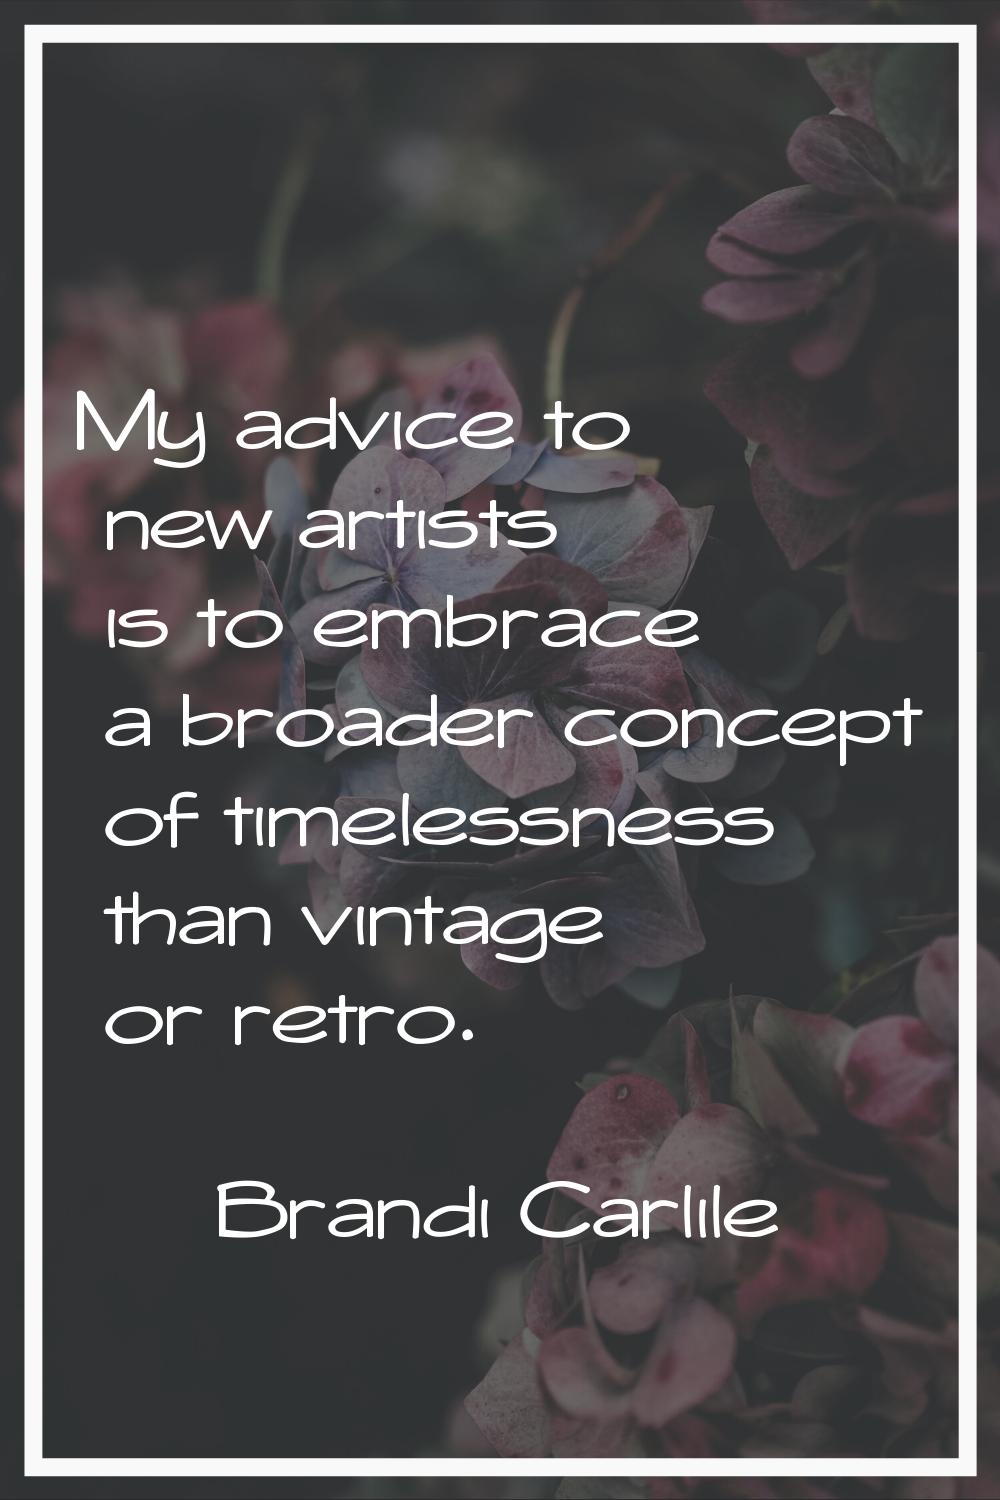 My advice to new artists is to embrace a broader concept of timelessness than vintage or retro.